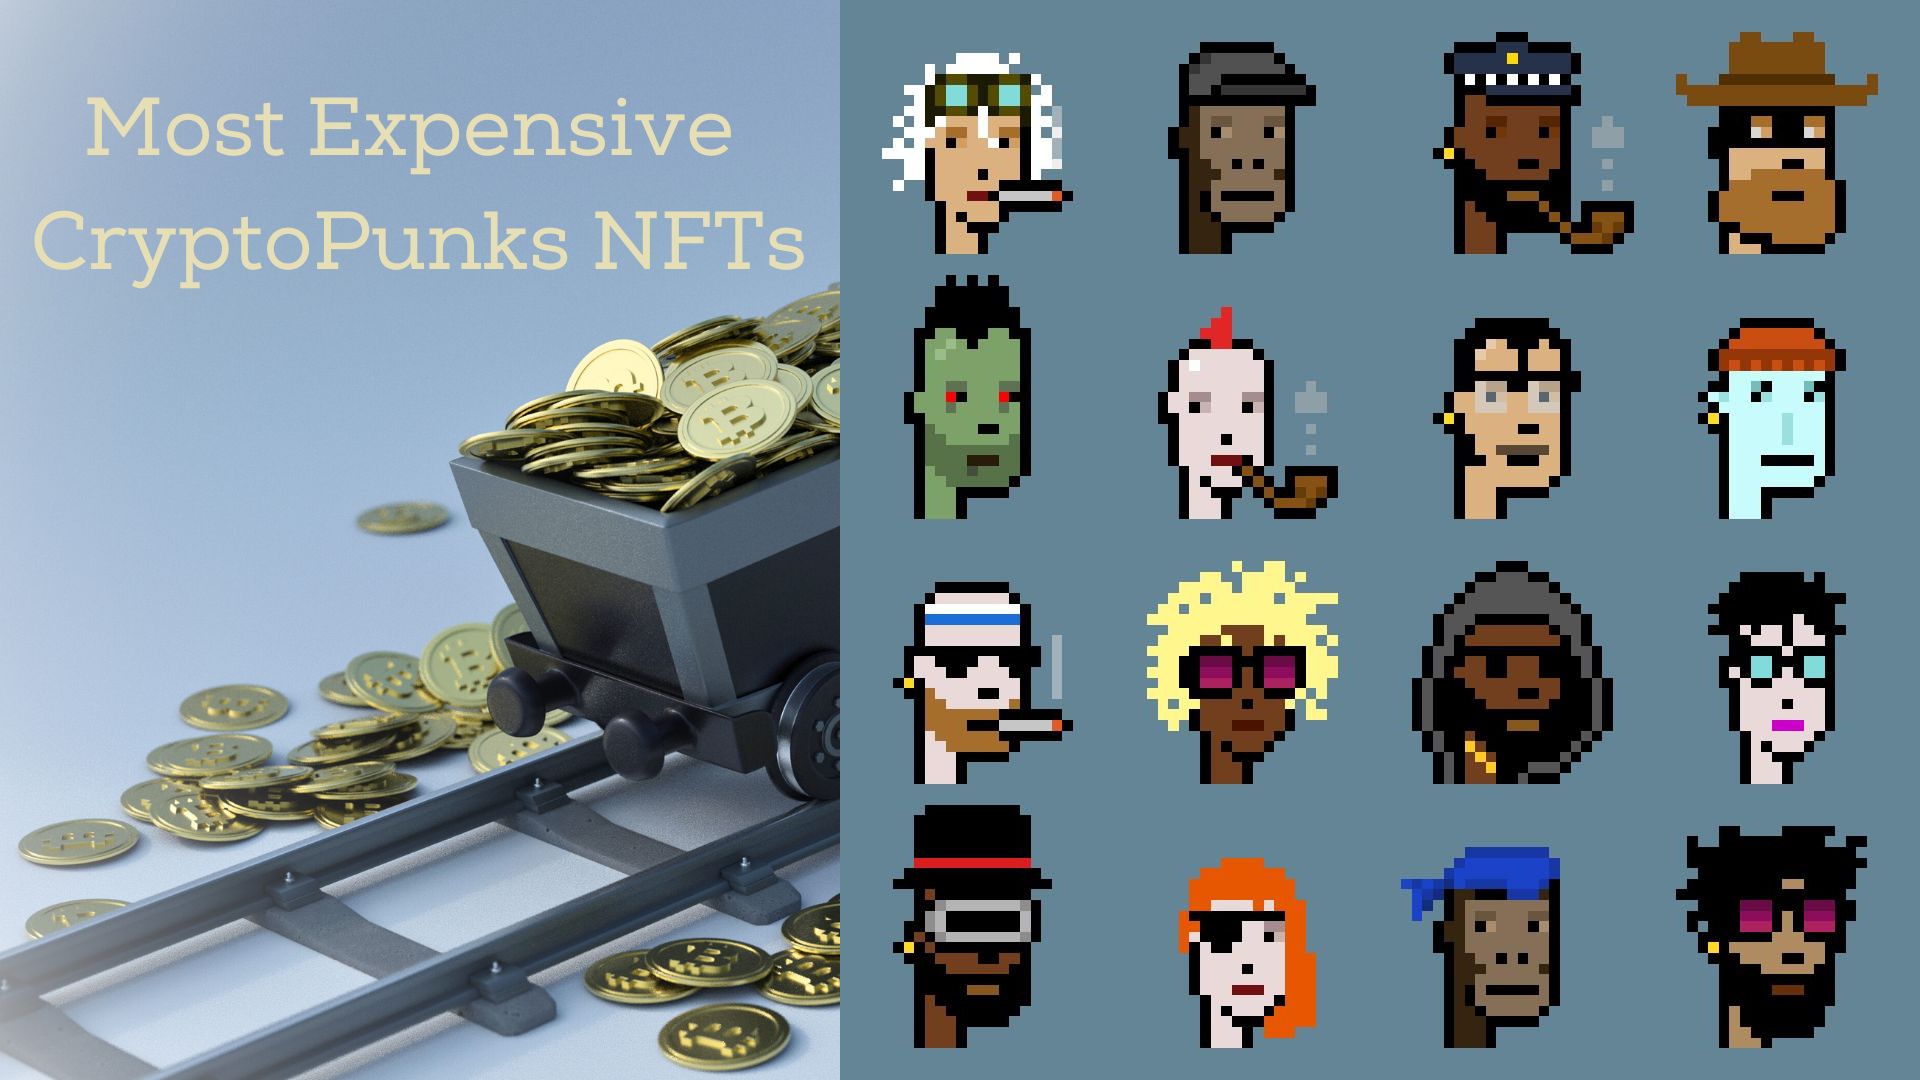 The Ultimate Digital Treasures: World’s Top 10 Most Expensive CryptoPunks NFTs